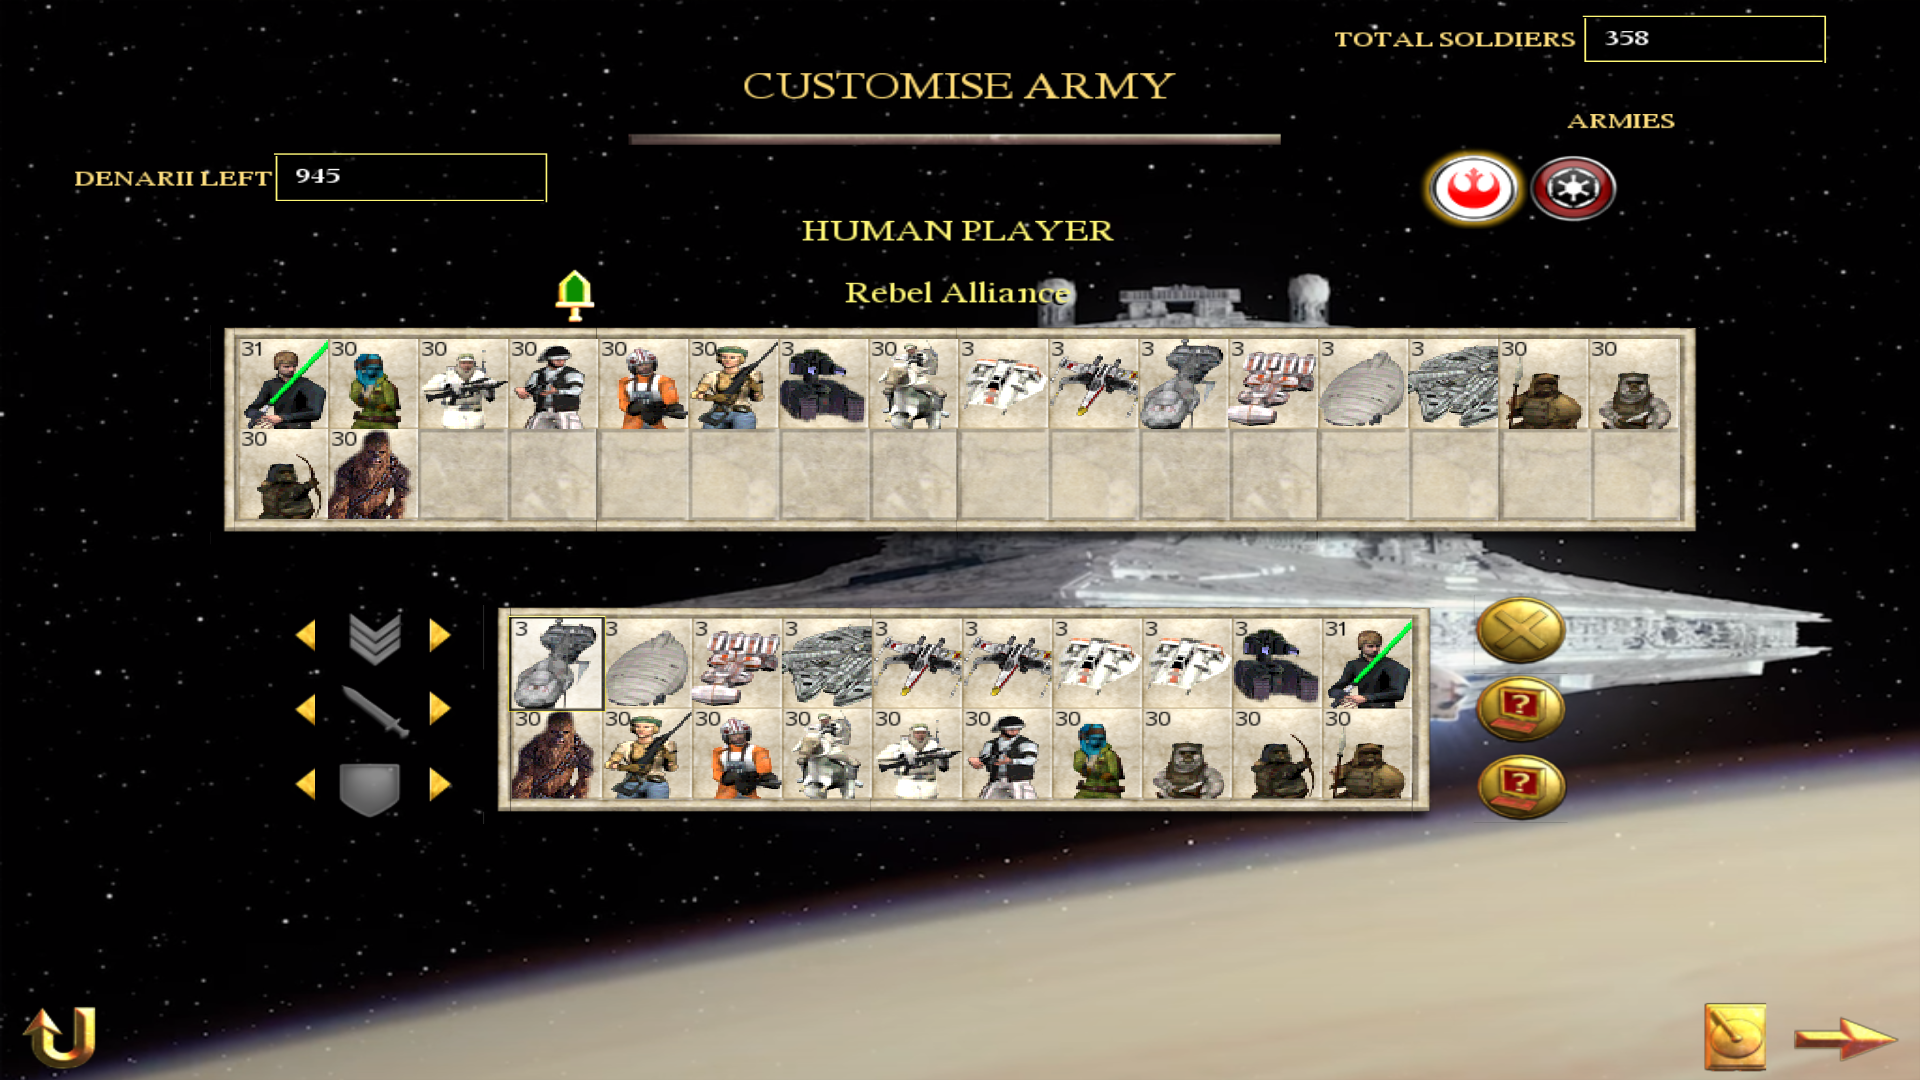 The Rebel Alliance has 6 new units!